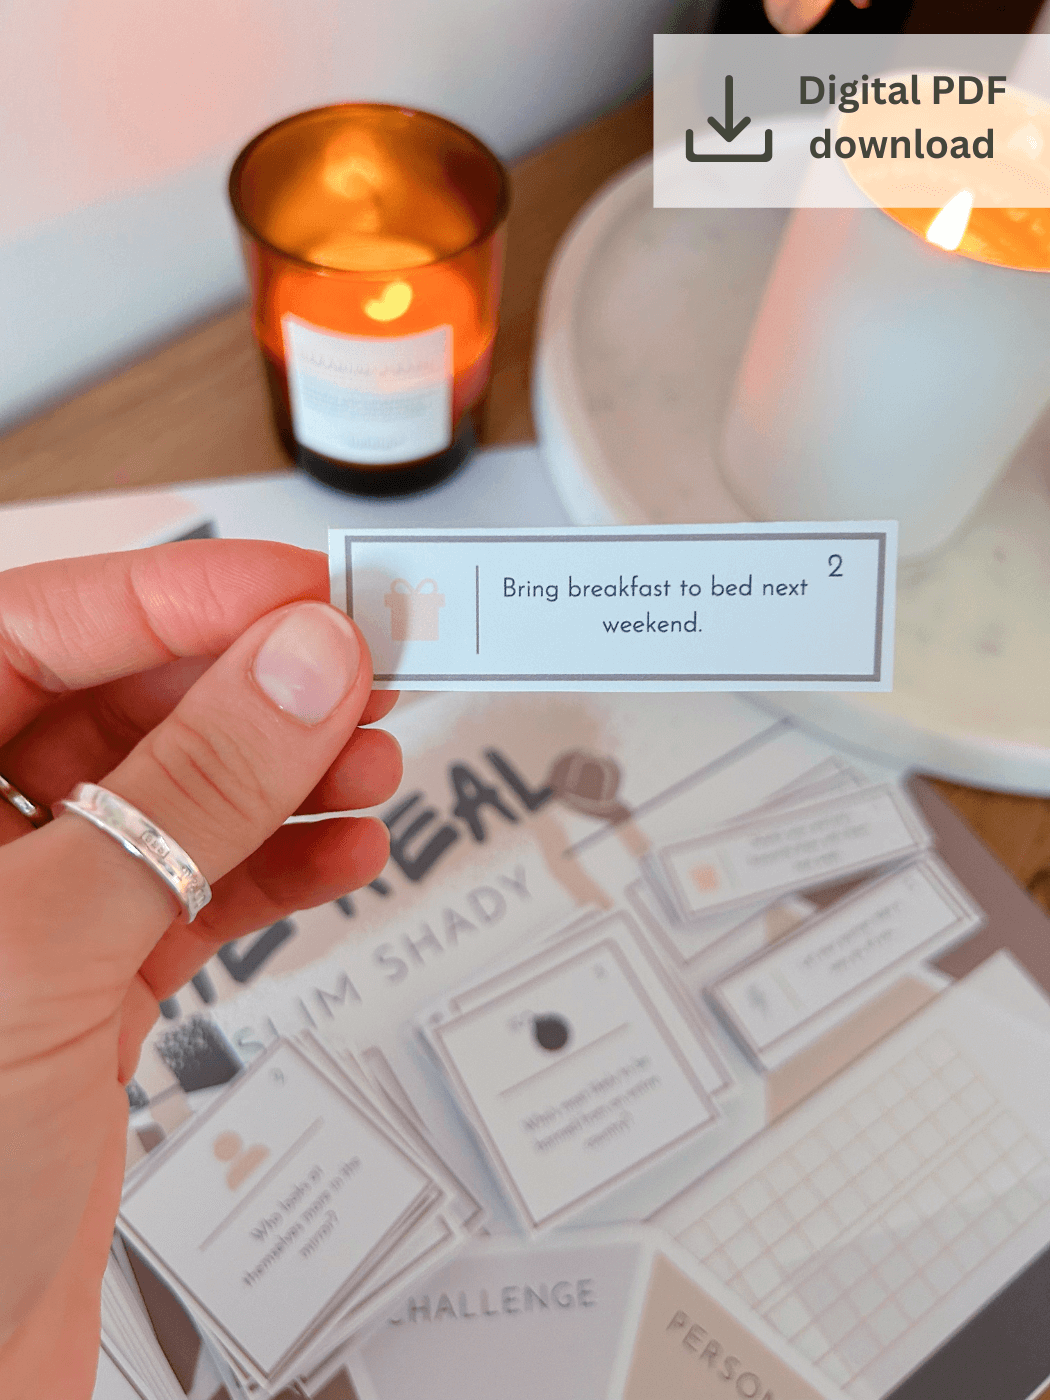 'The Real Slim Shady' Printable Date Night Game